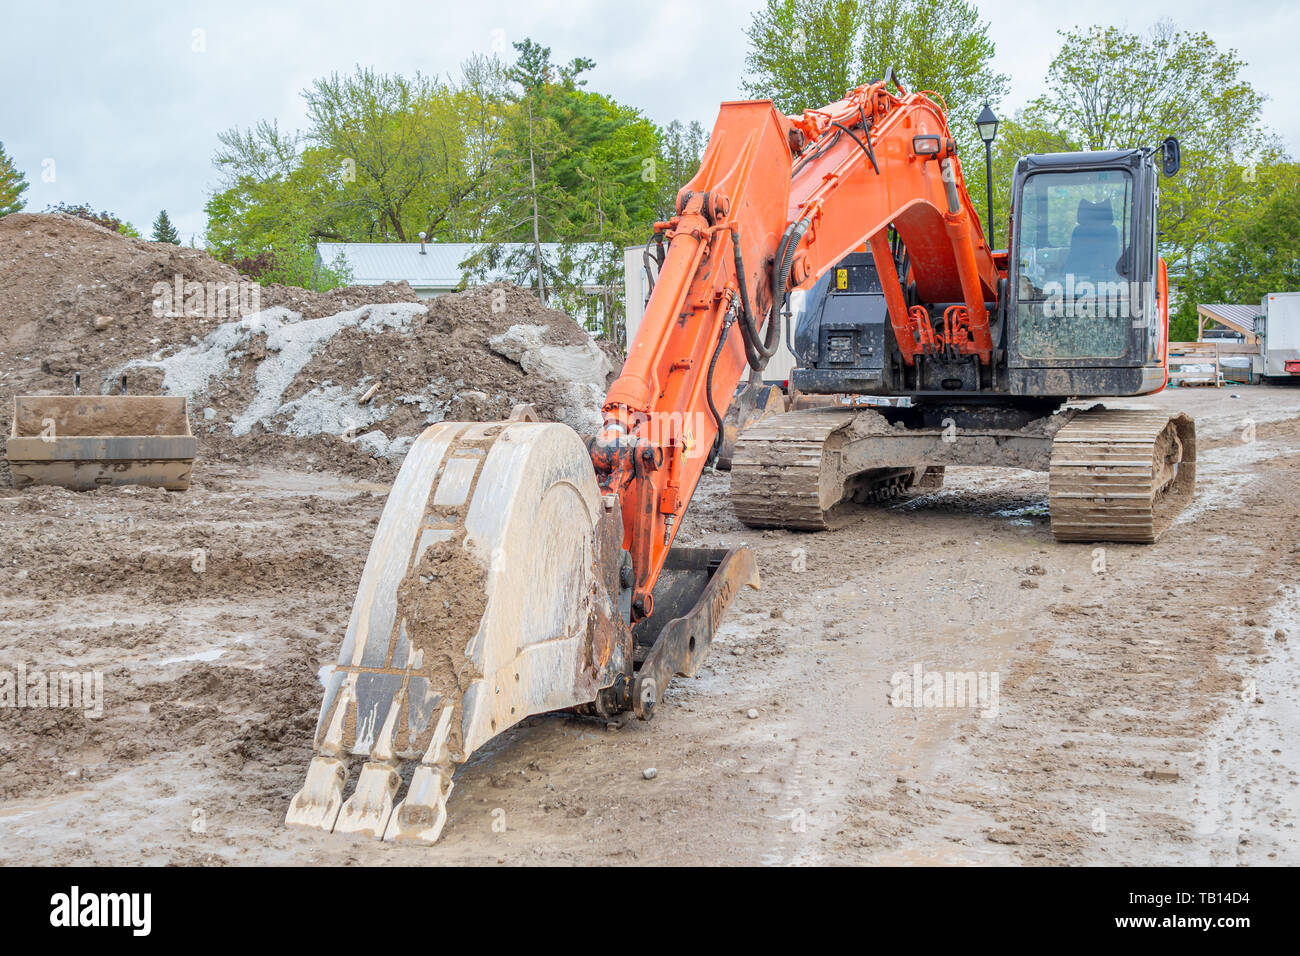 Dirty orange excavator parked at a construction site. Stock Photo